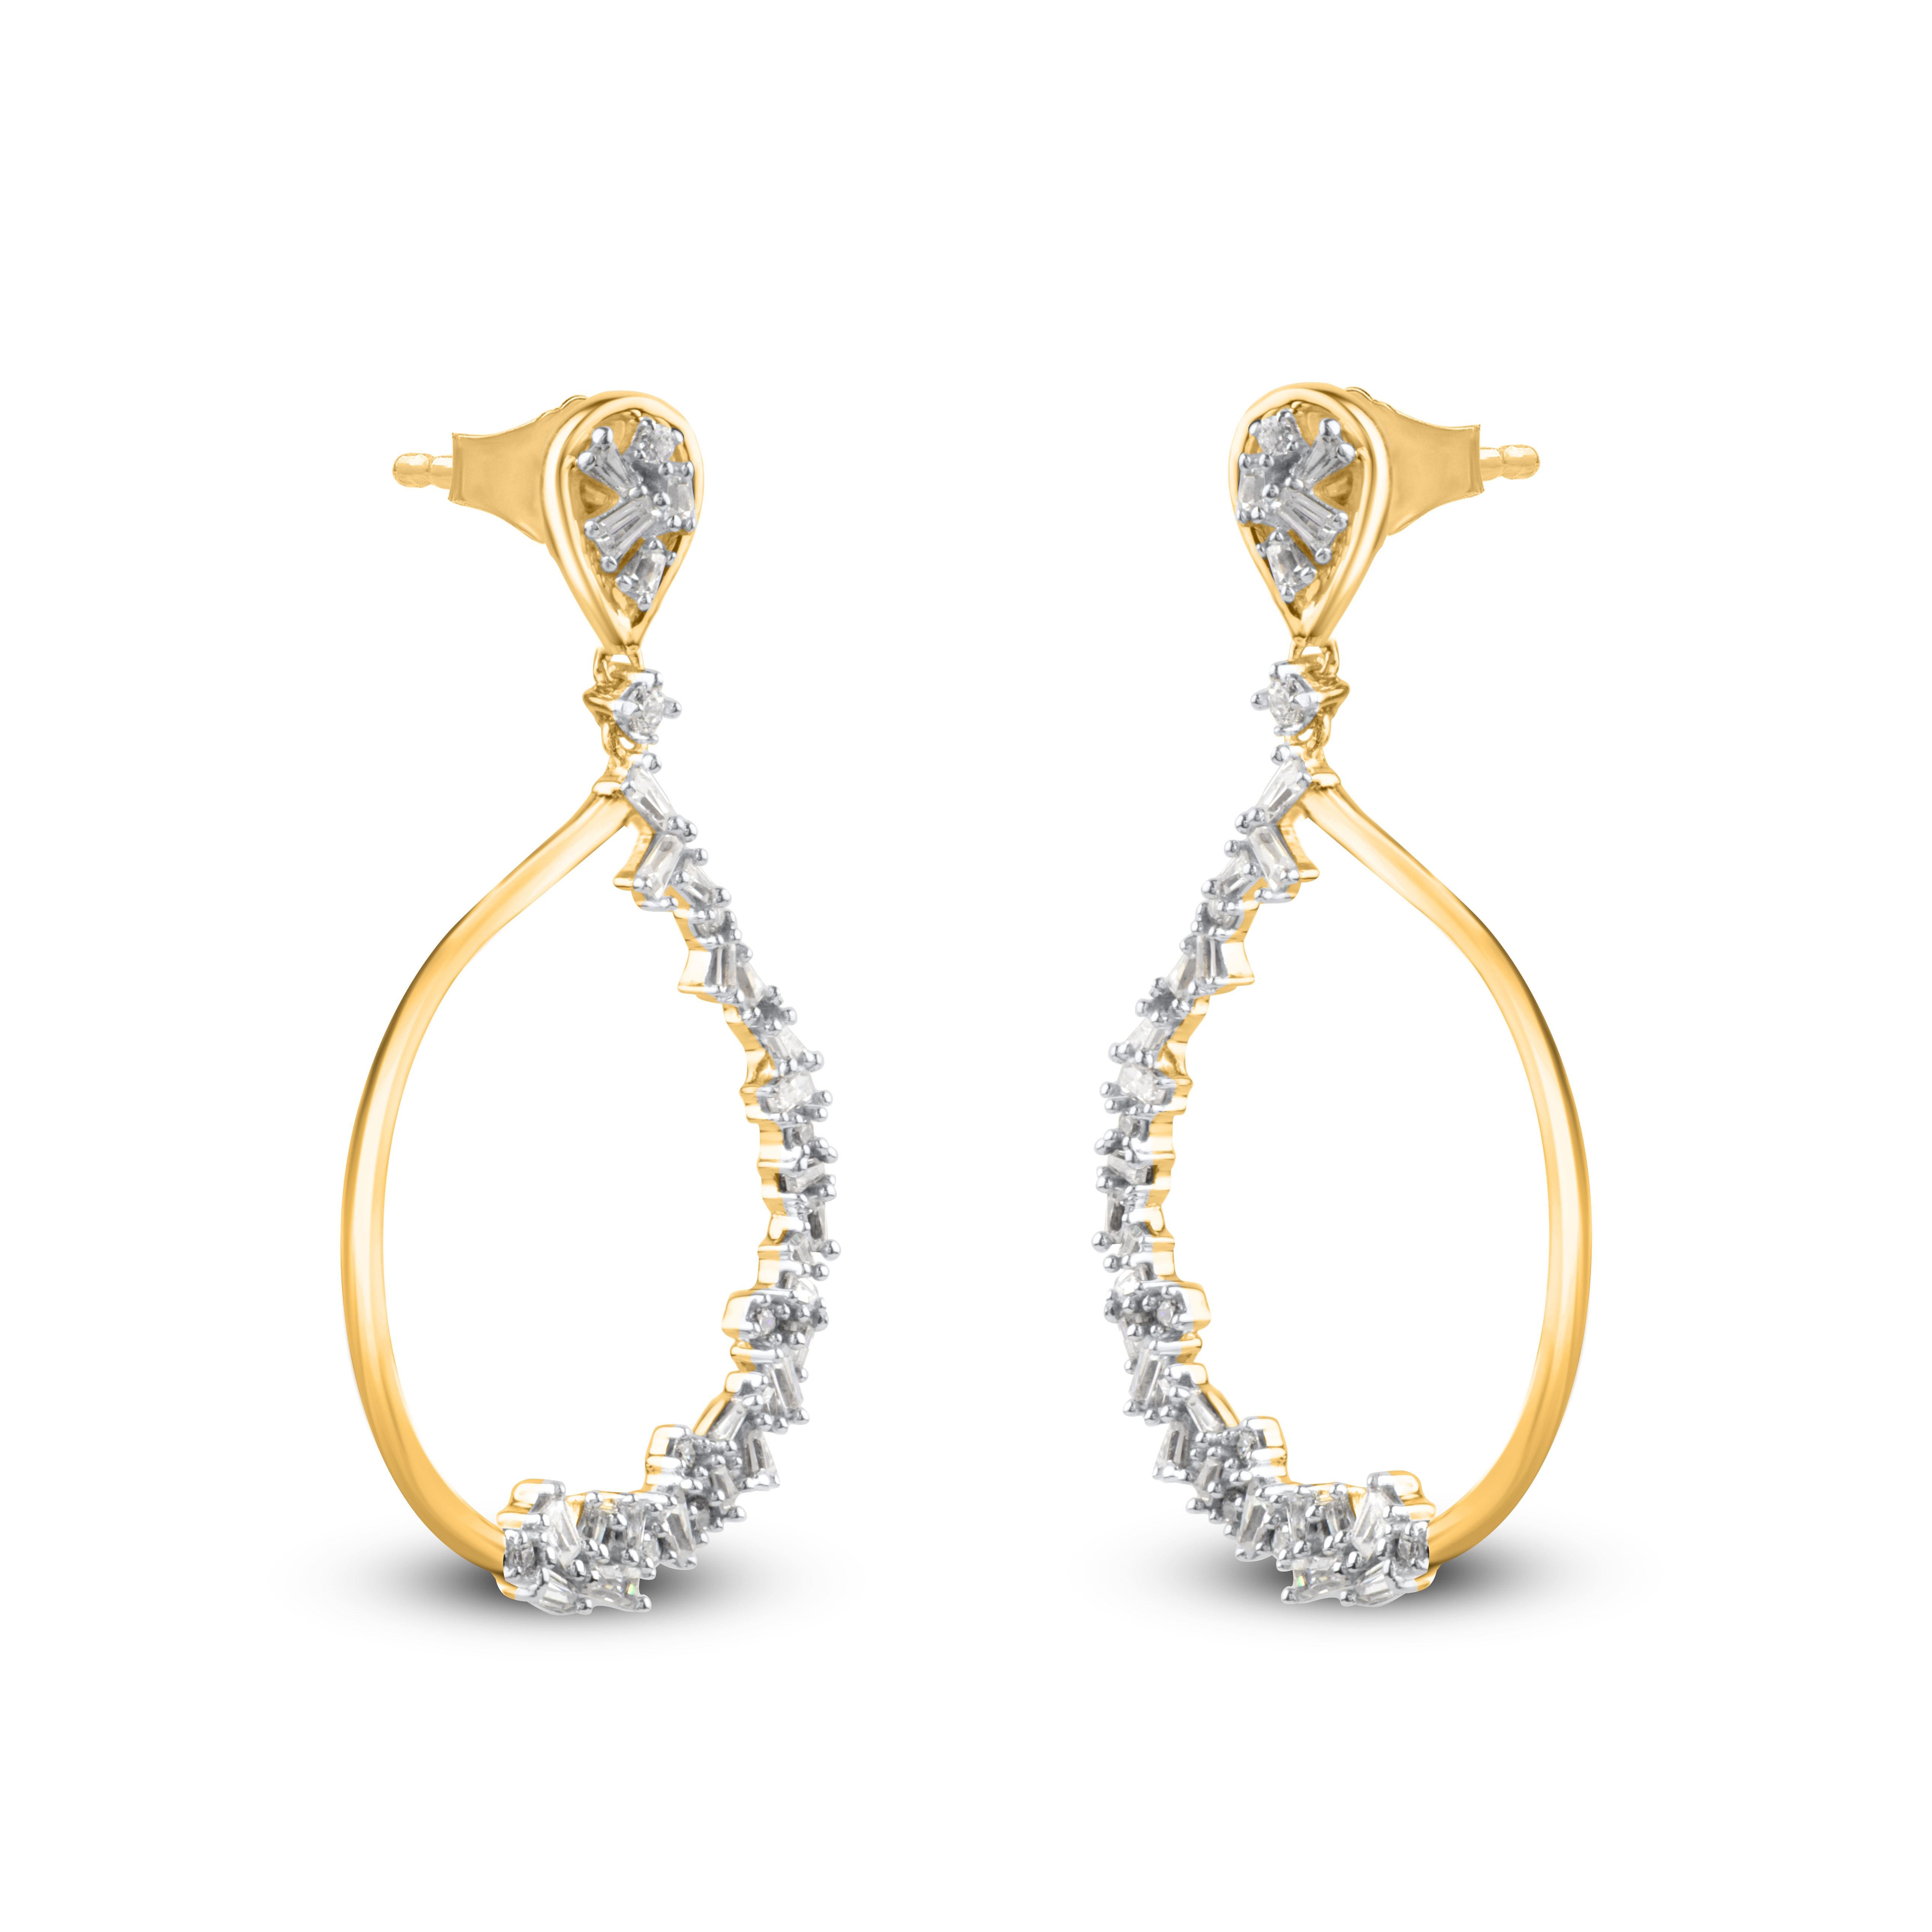 A sparkling delight, these diamond drop earrings fit her charming aesthetic. Embellished with 18 round brilliant and 54 baguette-cut diamond set in prong setting, and dazzles with H-I color I2 clarity. Captivating with 0.50 Carat and secures